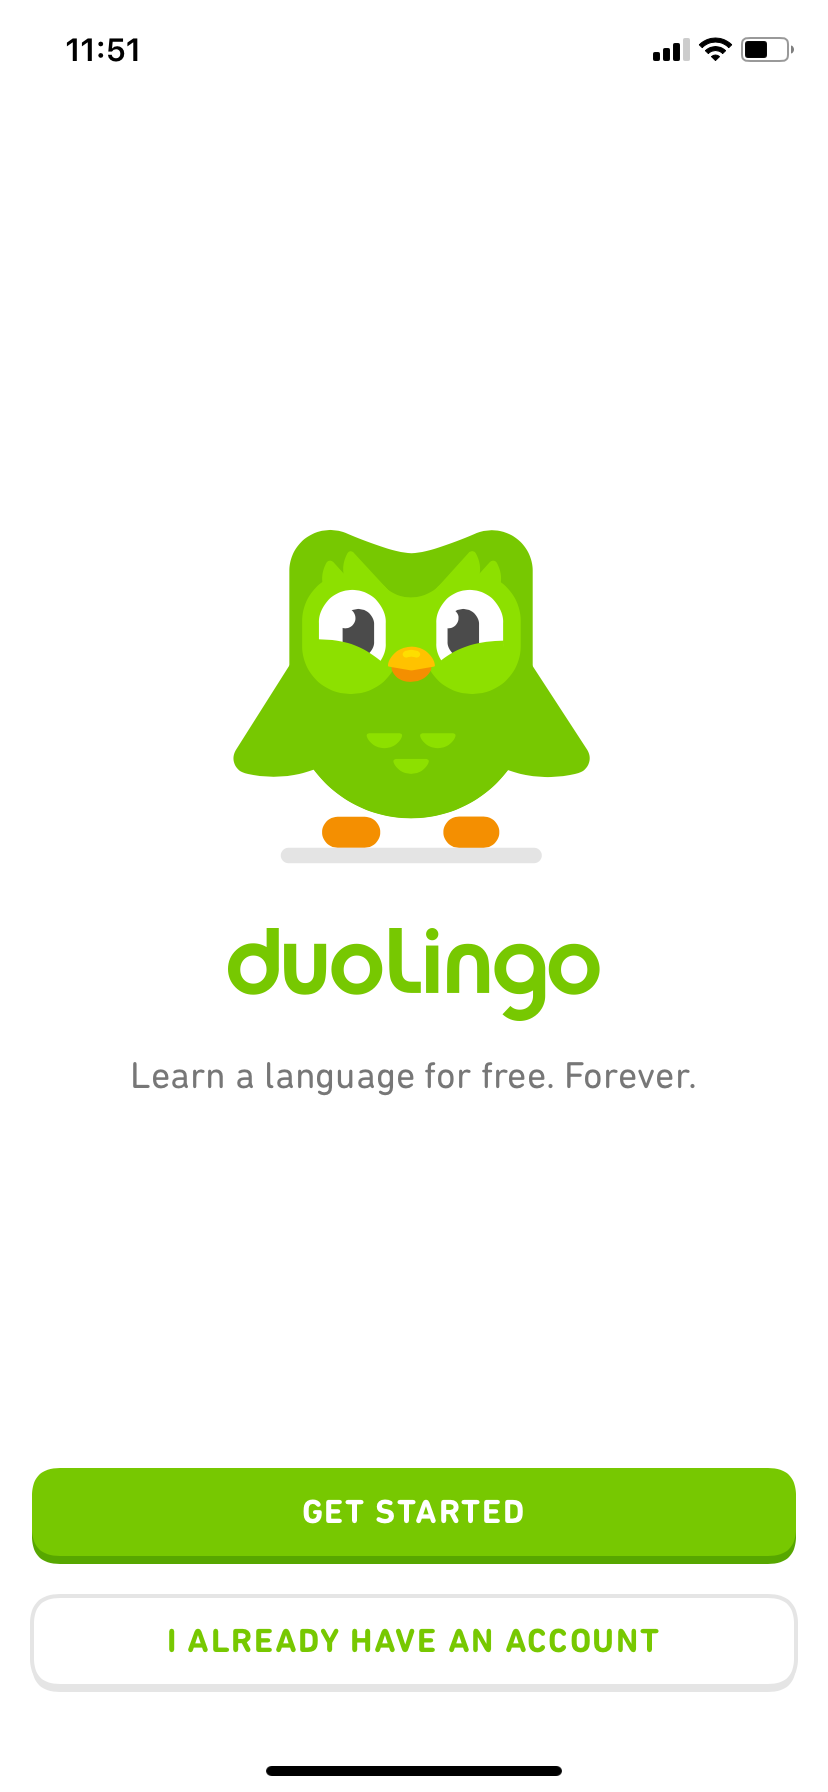 Screenshot of the home page of Duolingo when first opening the app, inviting user to get started or login